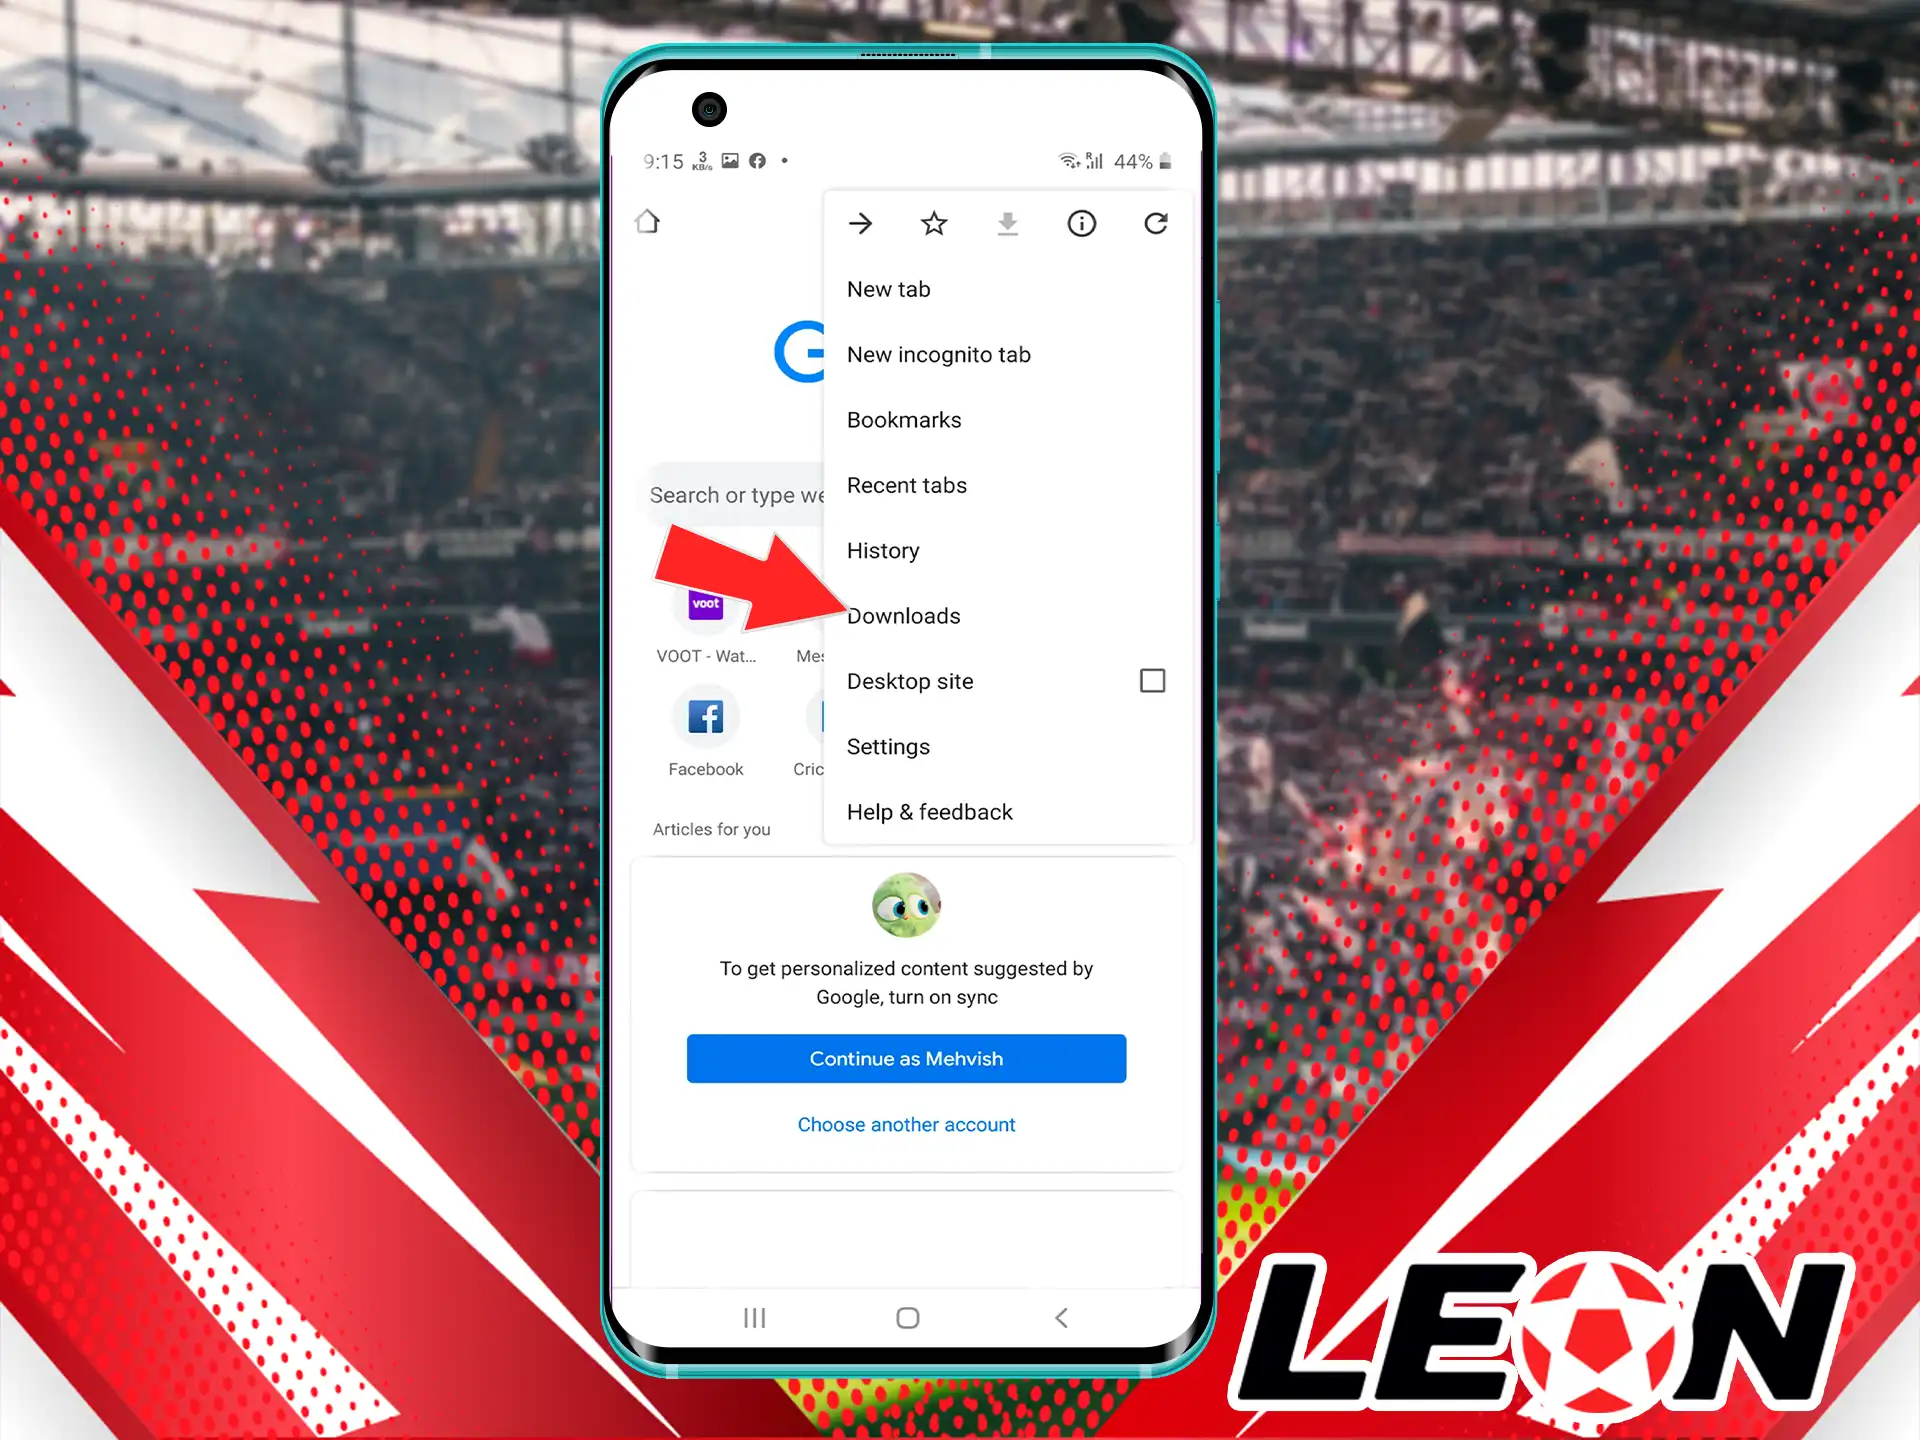 Find the necessary installation files usually downloaded to the folder with the same name and run the Leon Bet App installation process.